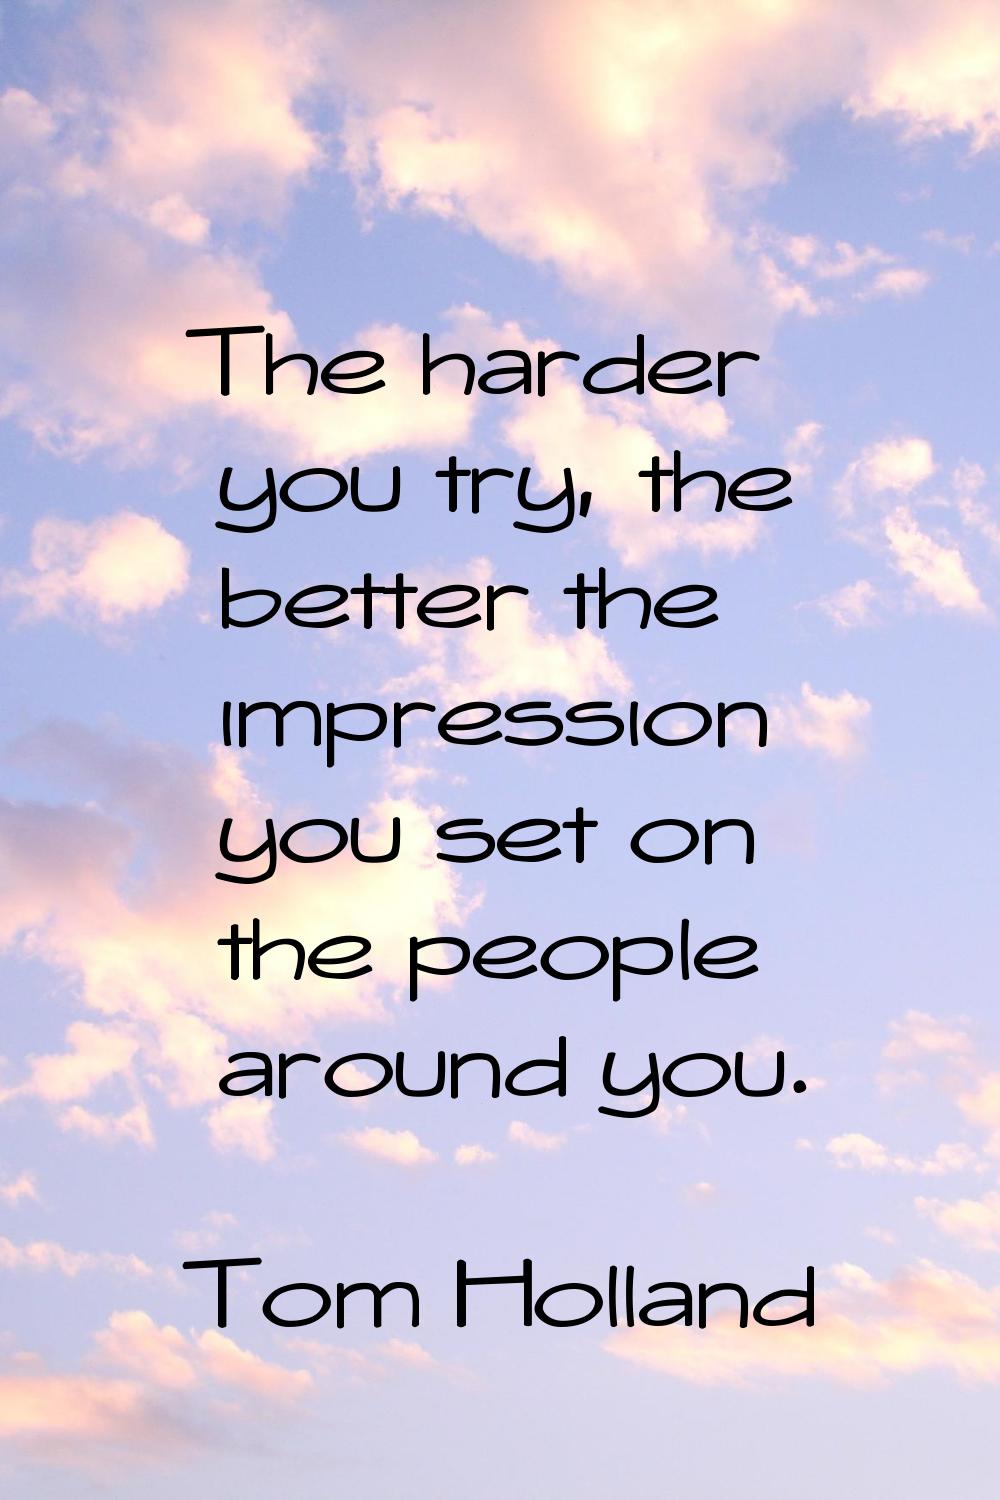 The harder you try, the better the impression you set on the people around you.